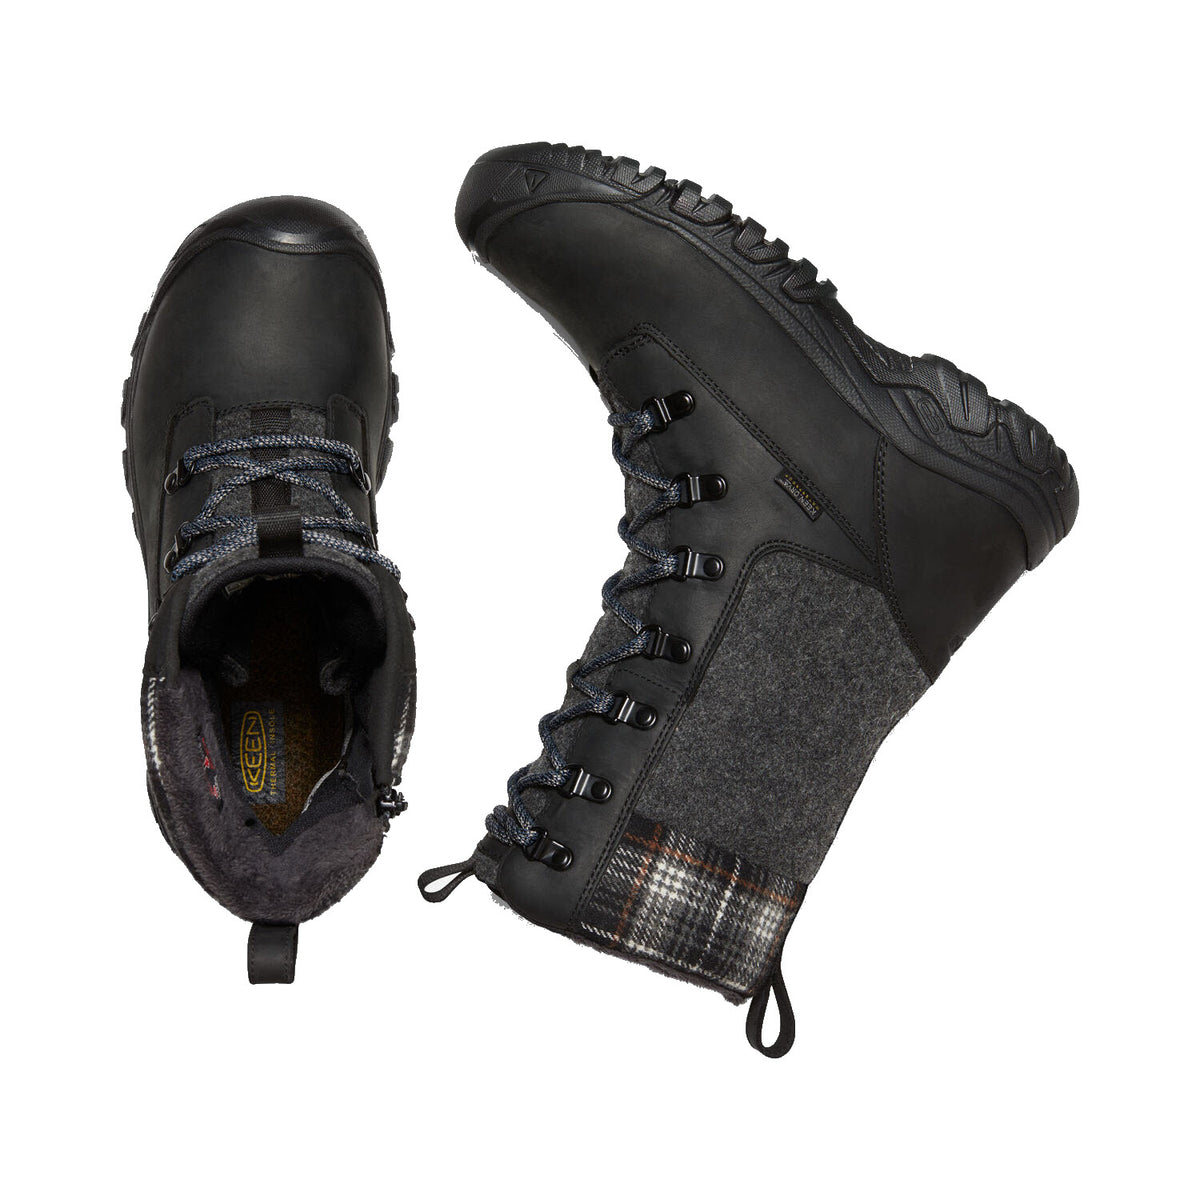 A pair of black Keen Greta Tall Waterproof Boot with laces on a white background.